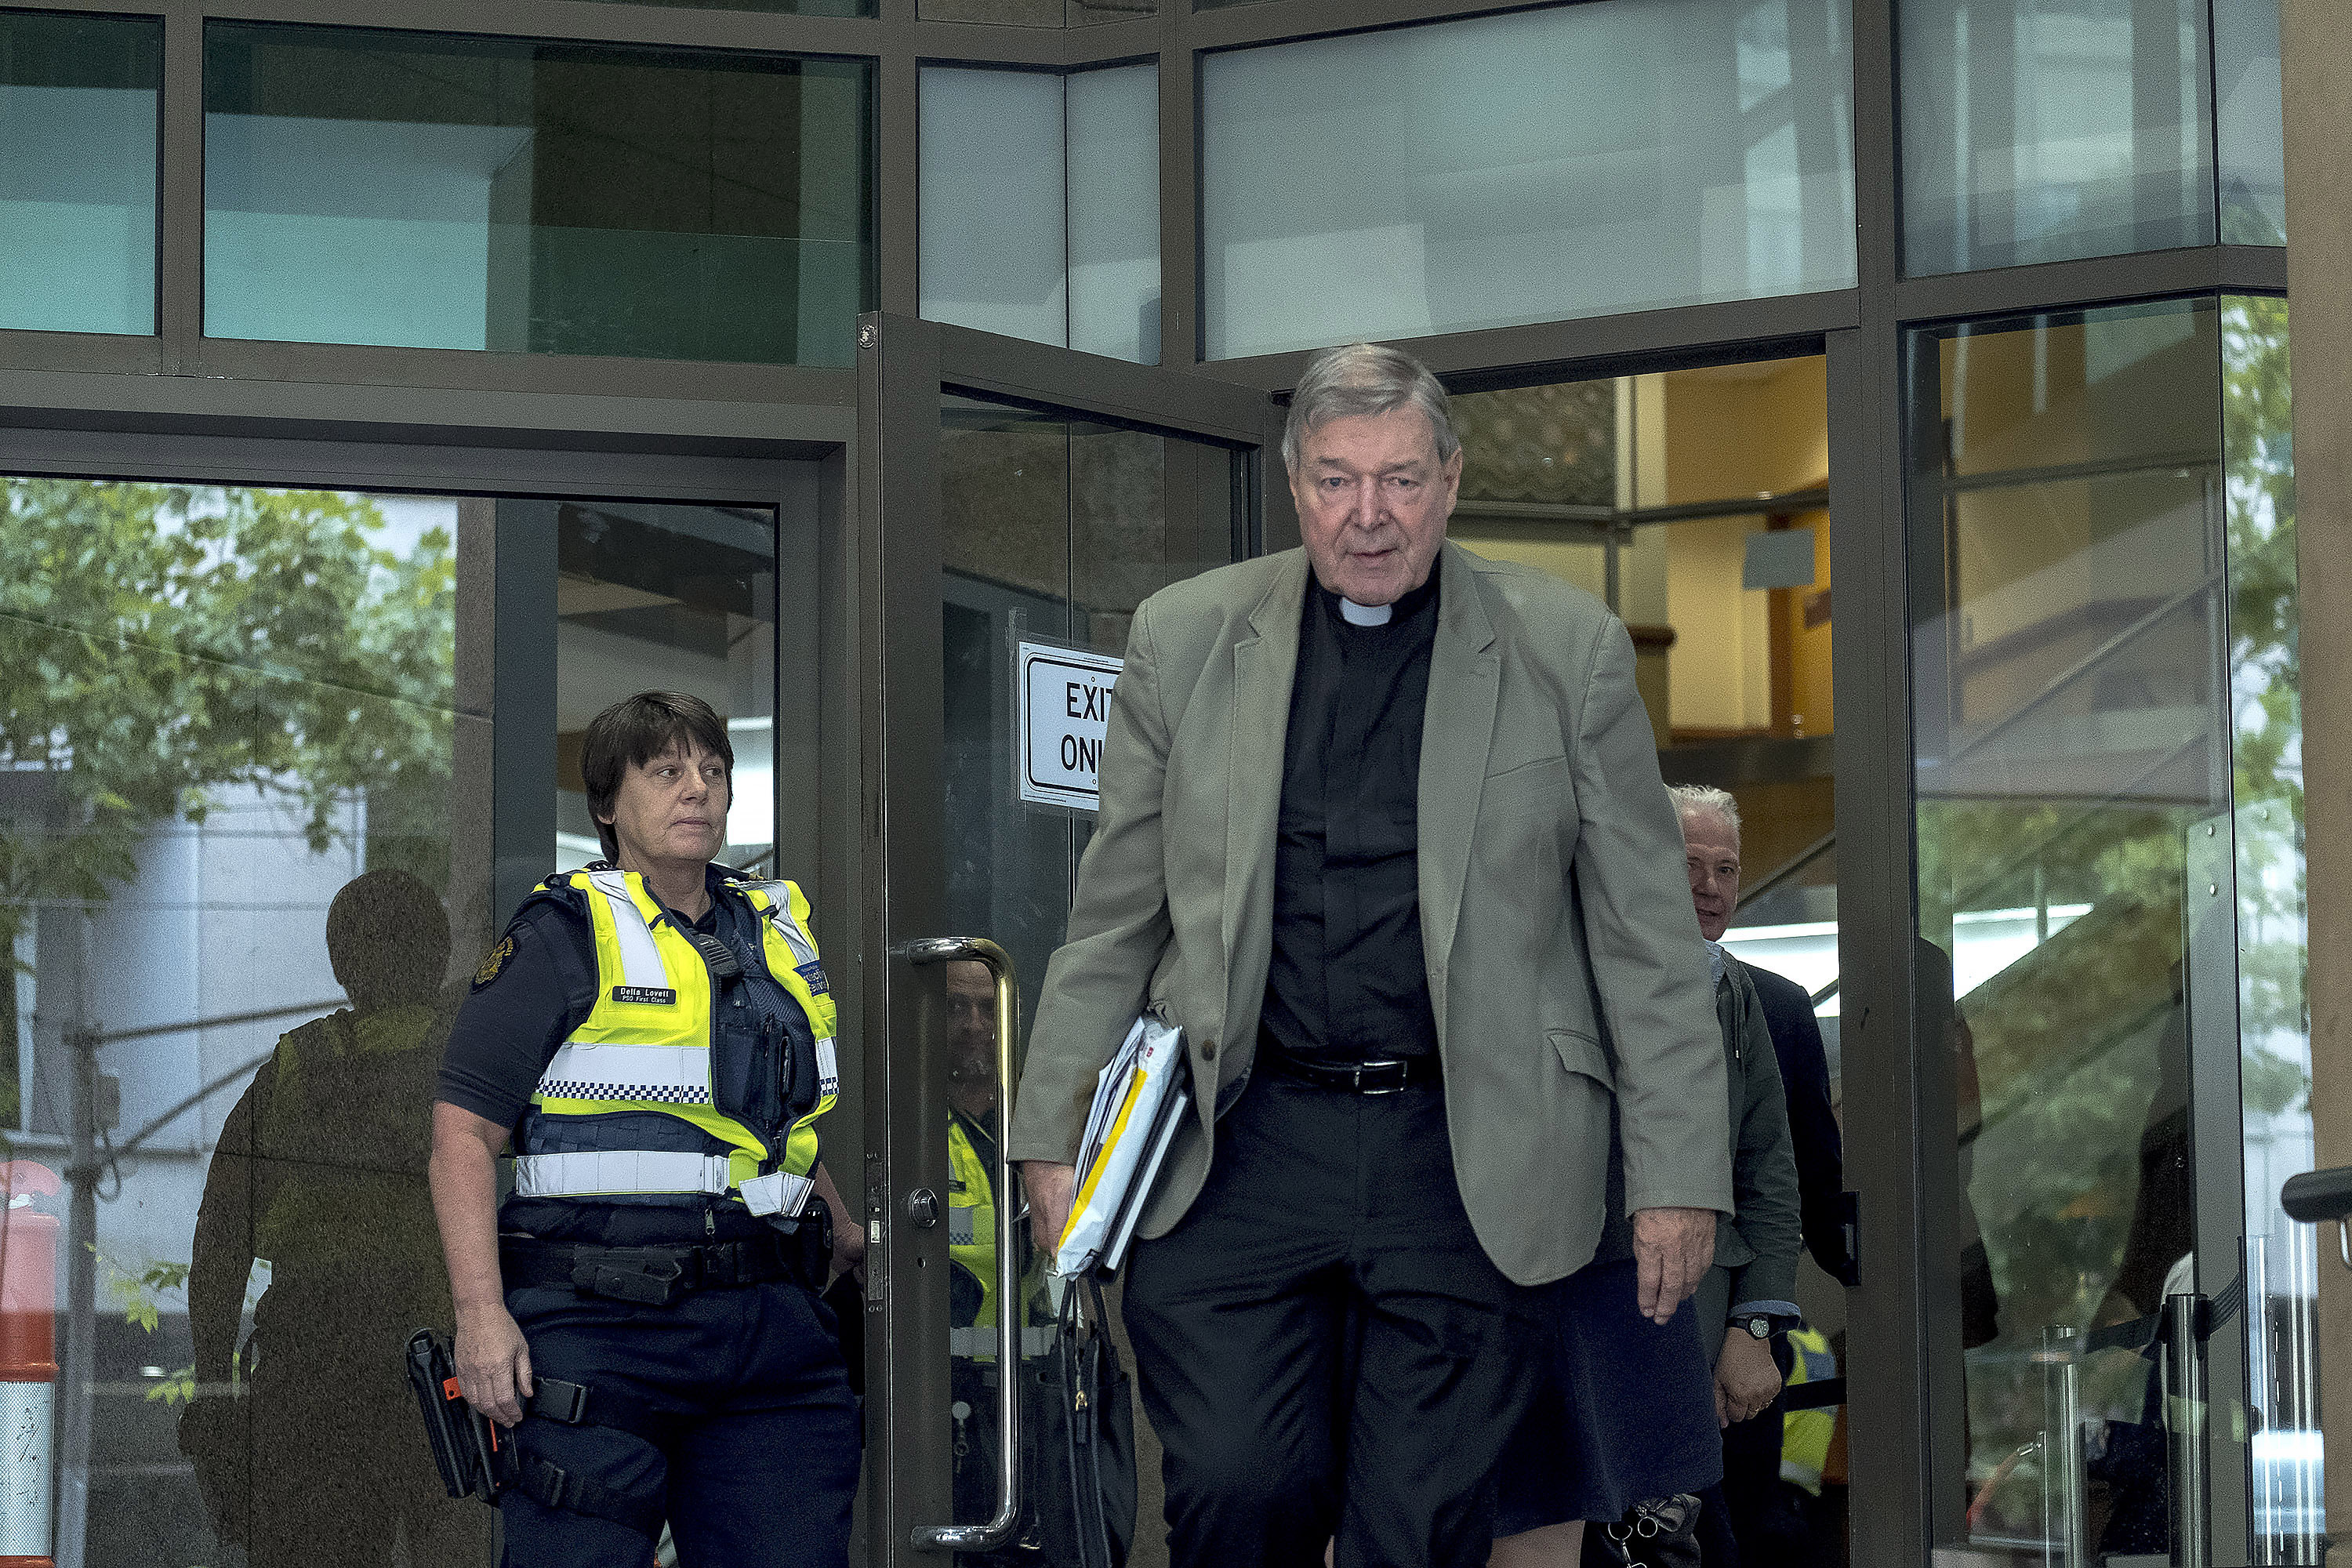 Cardinal George Pell could face new charges